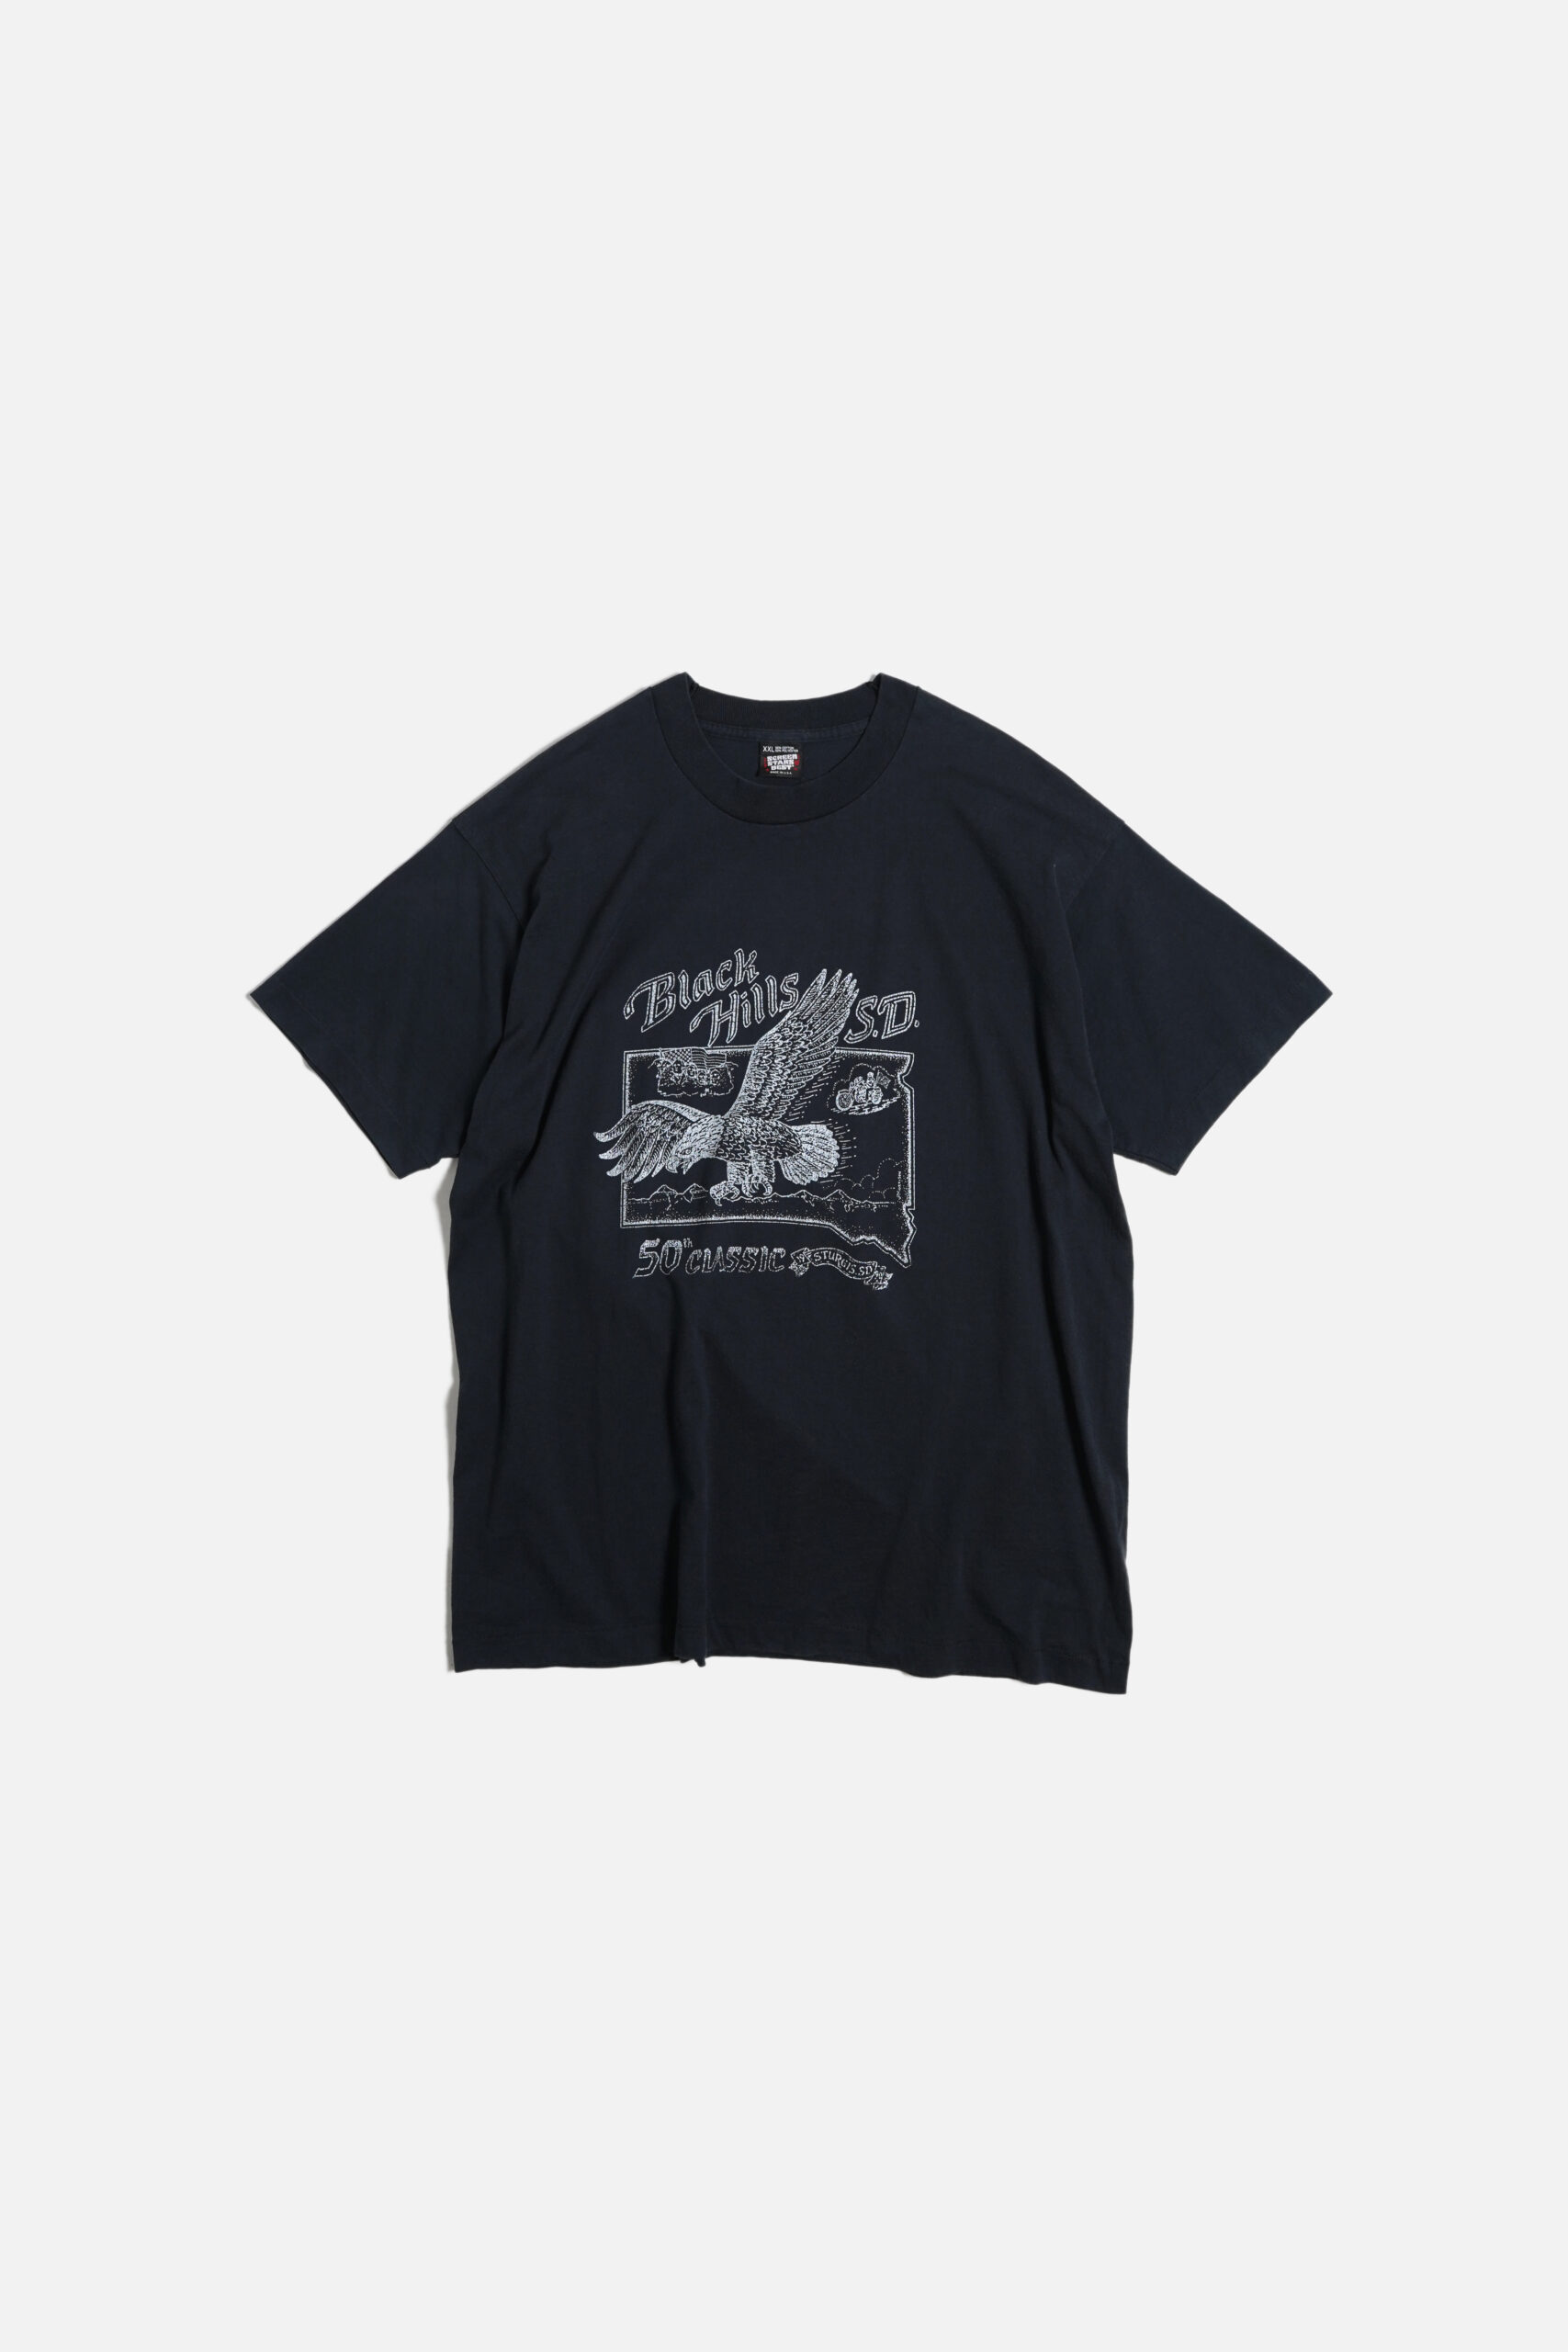 PRINTED T-SHIRTS " Black Hills S.D. " MADE IN USA